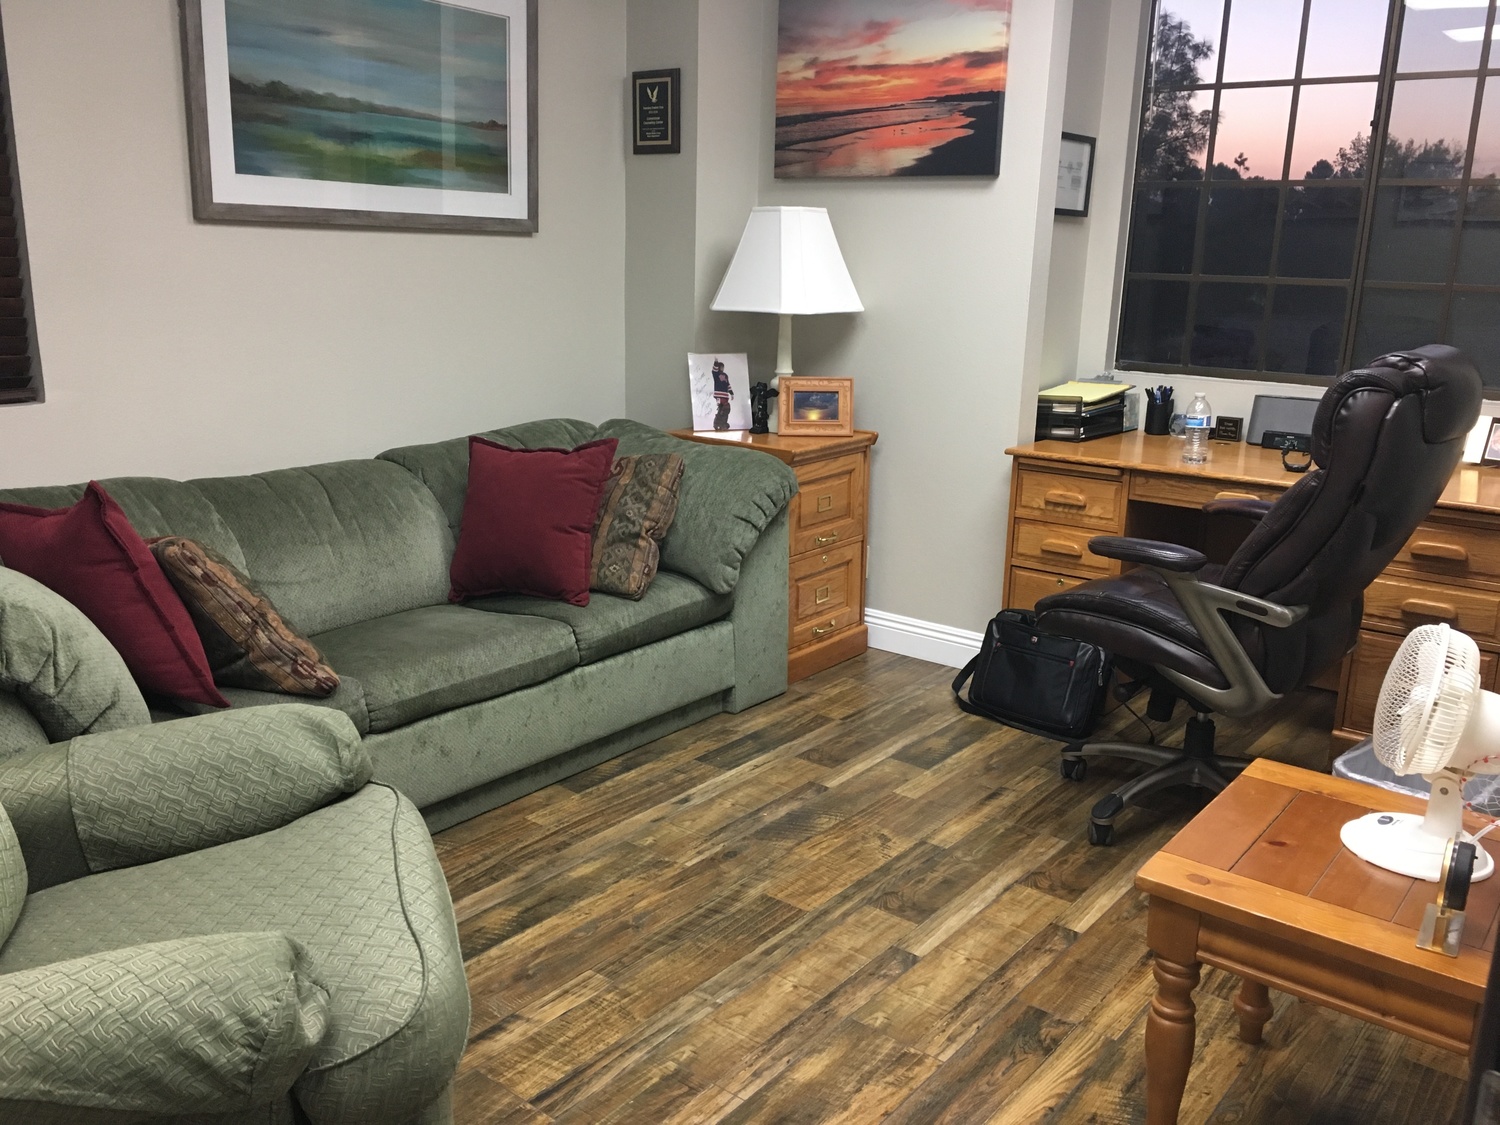 Gallery Photo of one therapy room